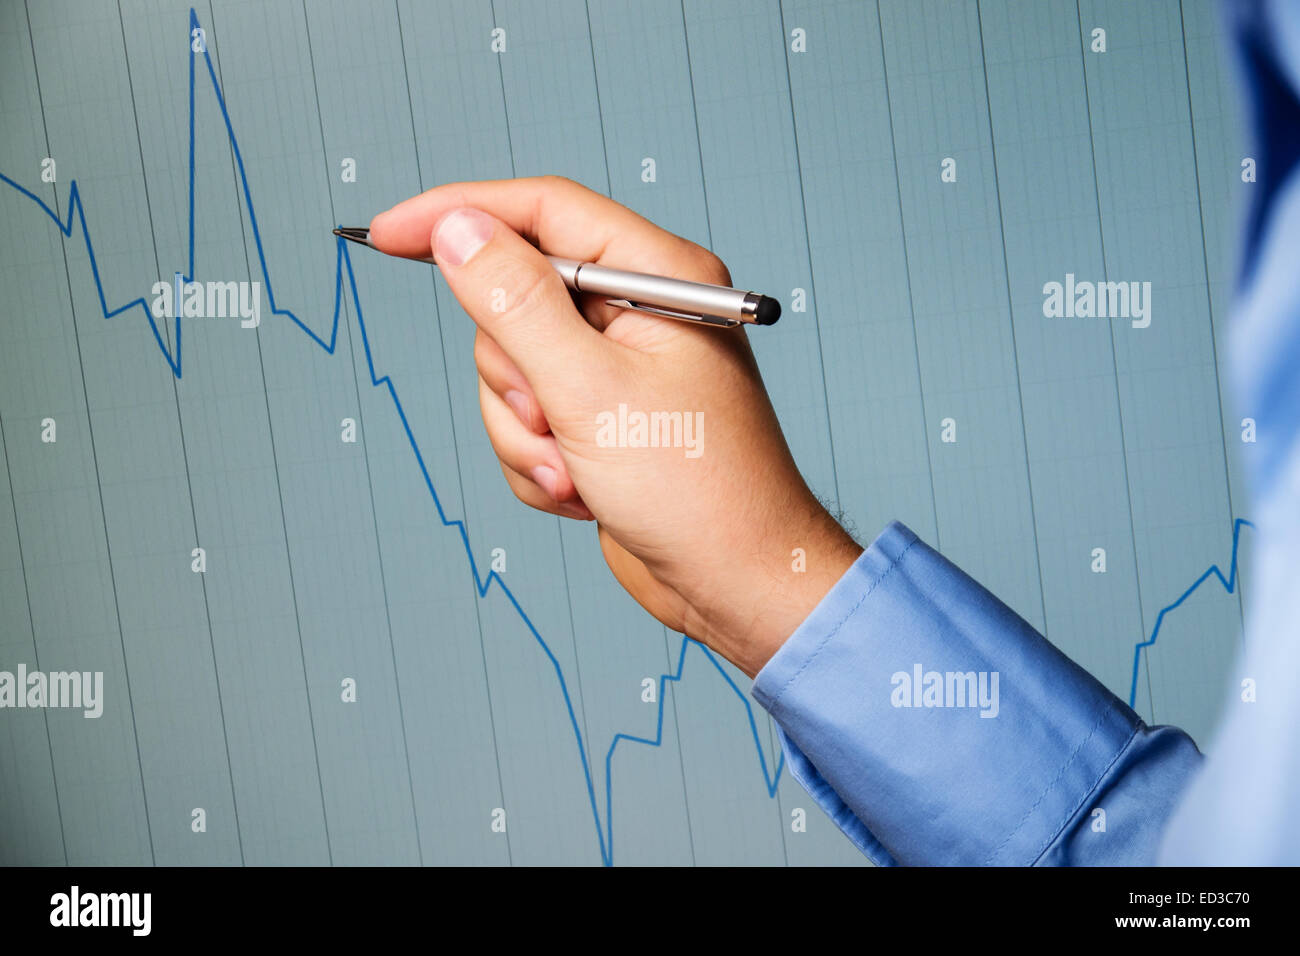 chart analysis and hand with a pen Stock Photo